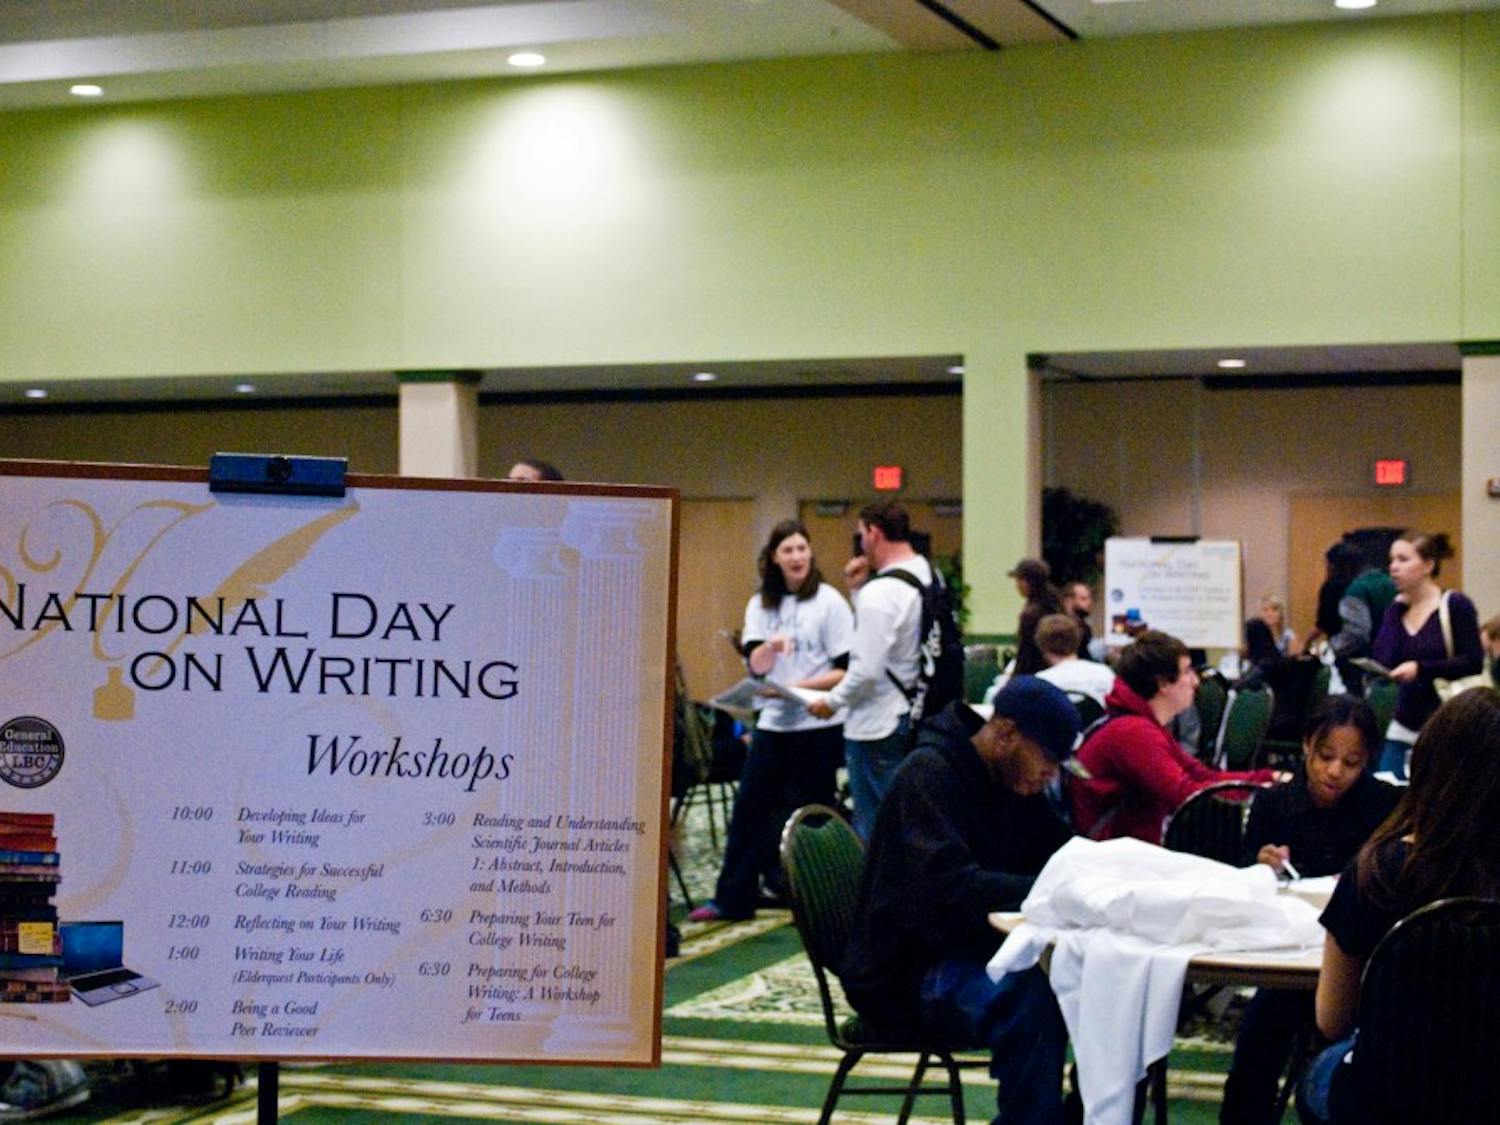 National Day on Writing was hosted at the EMU Student Center Ballroom.